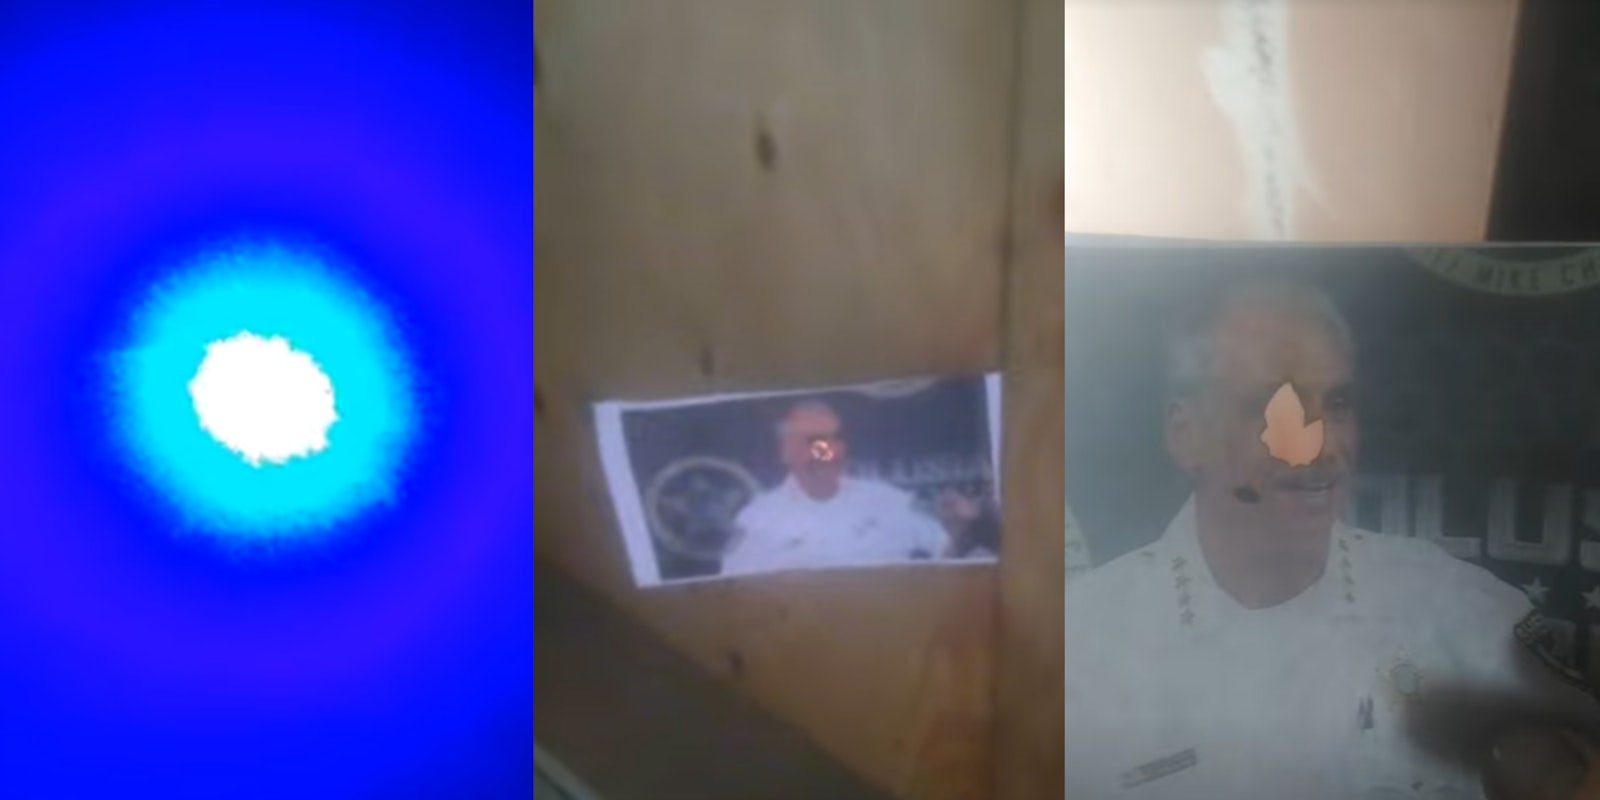 laser light (l) photo with hole burned on face (c) hole burned on face in photo (r)